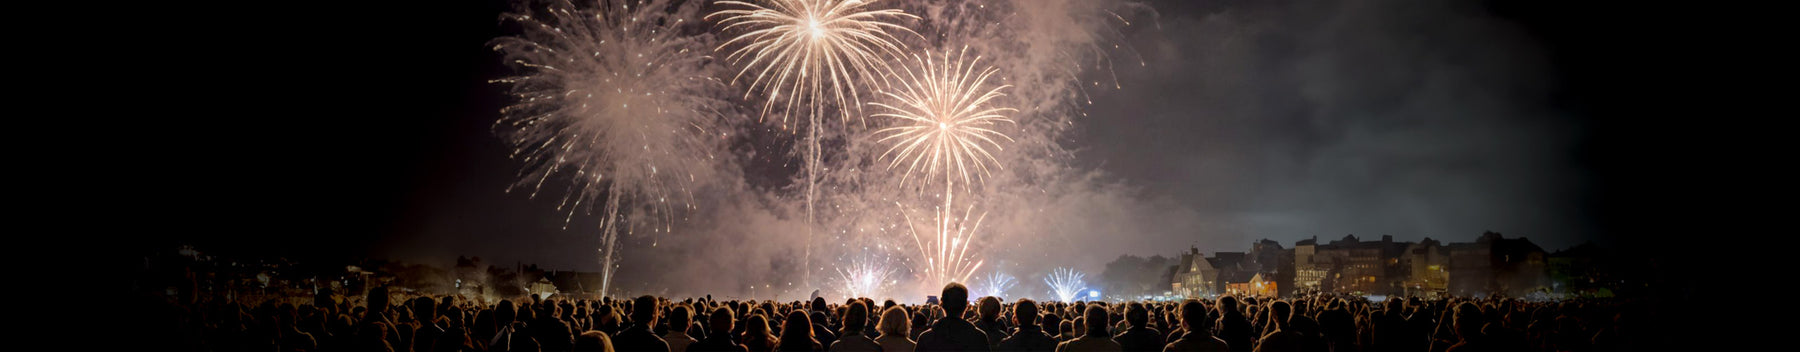 The Return of the Christchurch Rotary Fireworks Display